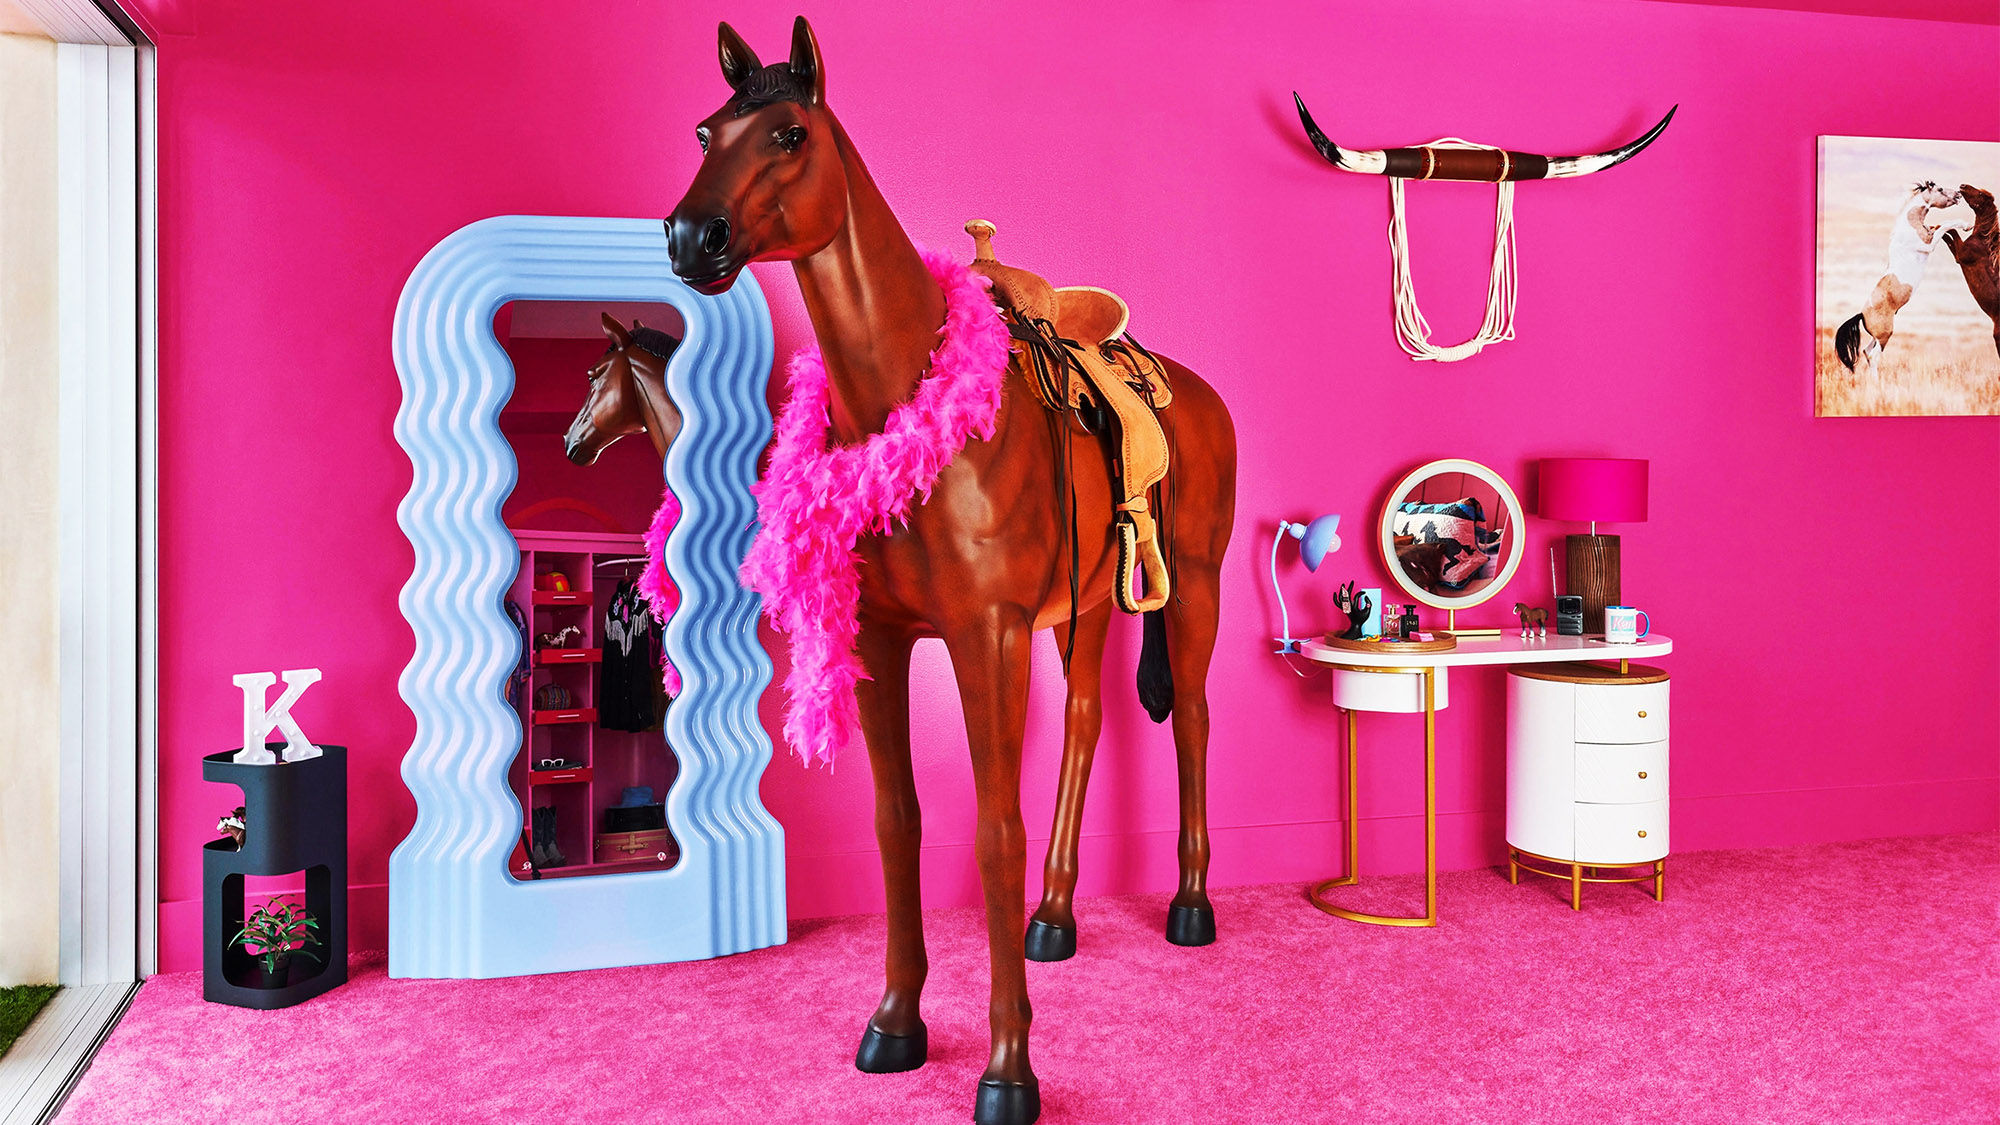 Ken's bedroom at the Barbie’s Malibu DreamHouse is outfitted with a life-size toy horse.